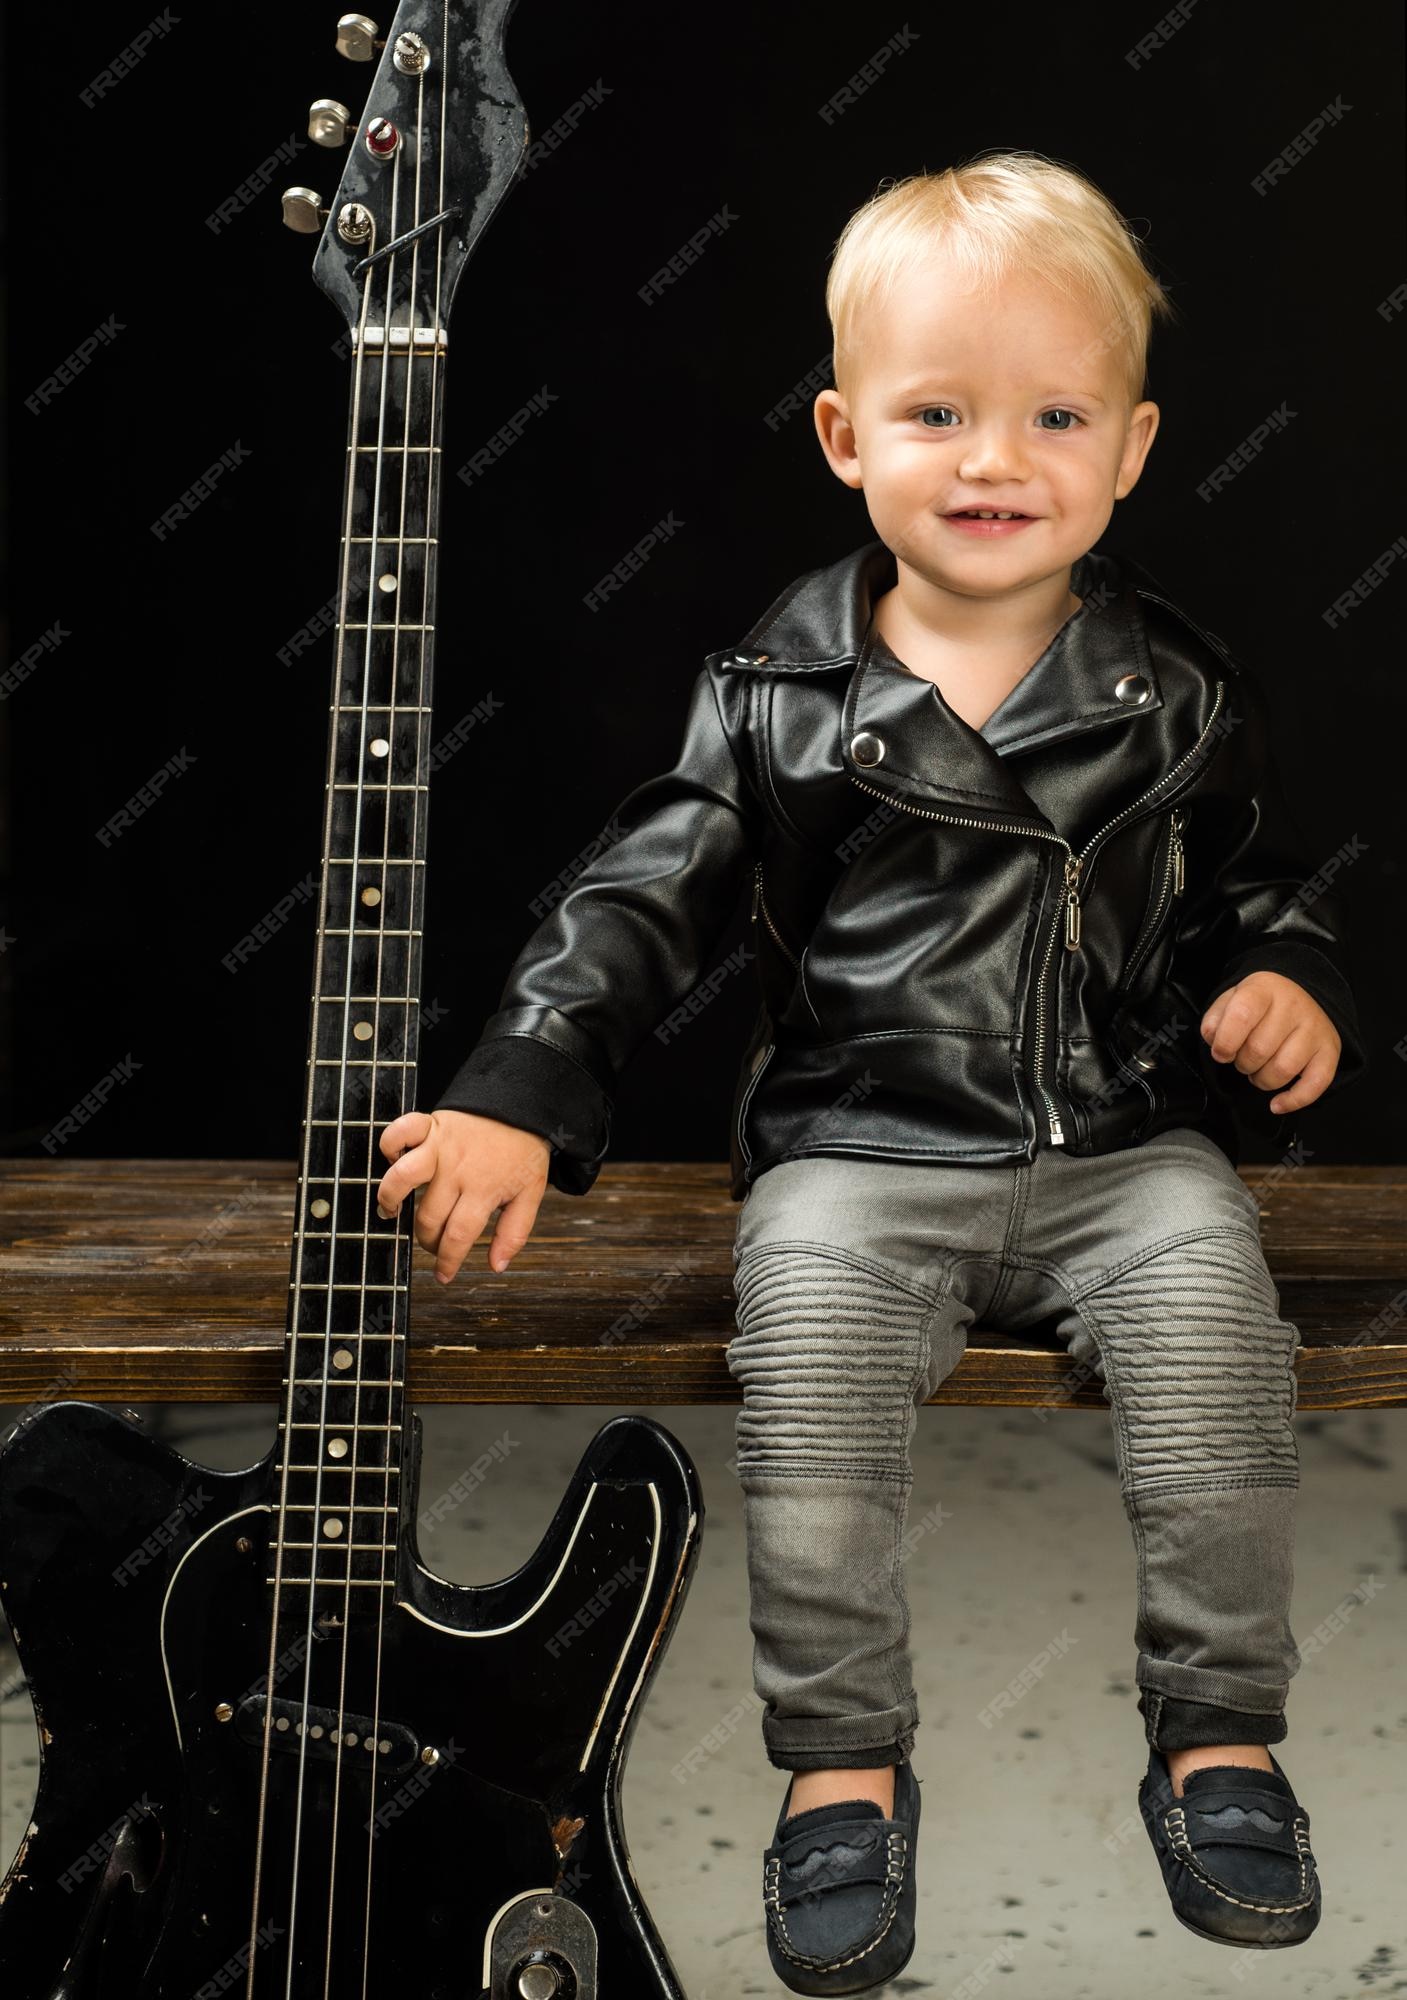 Premium Photo | Im not prince im rock and roll star. child boy with guitar.  little guitarist in rocker jacket. rock style child. rock and roll music  performer. adorable music fan. small